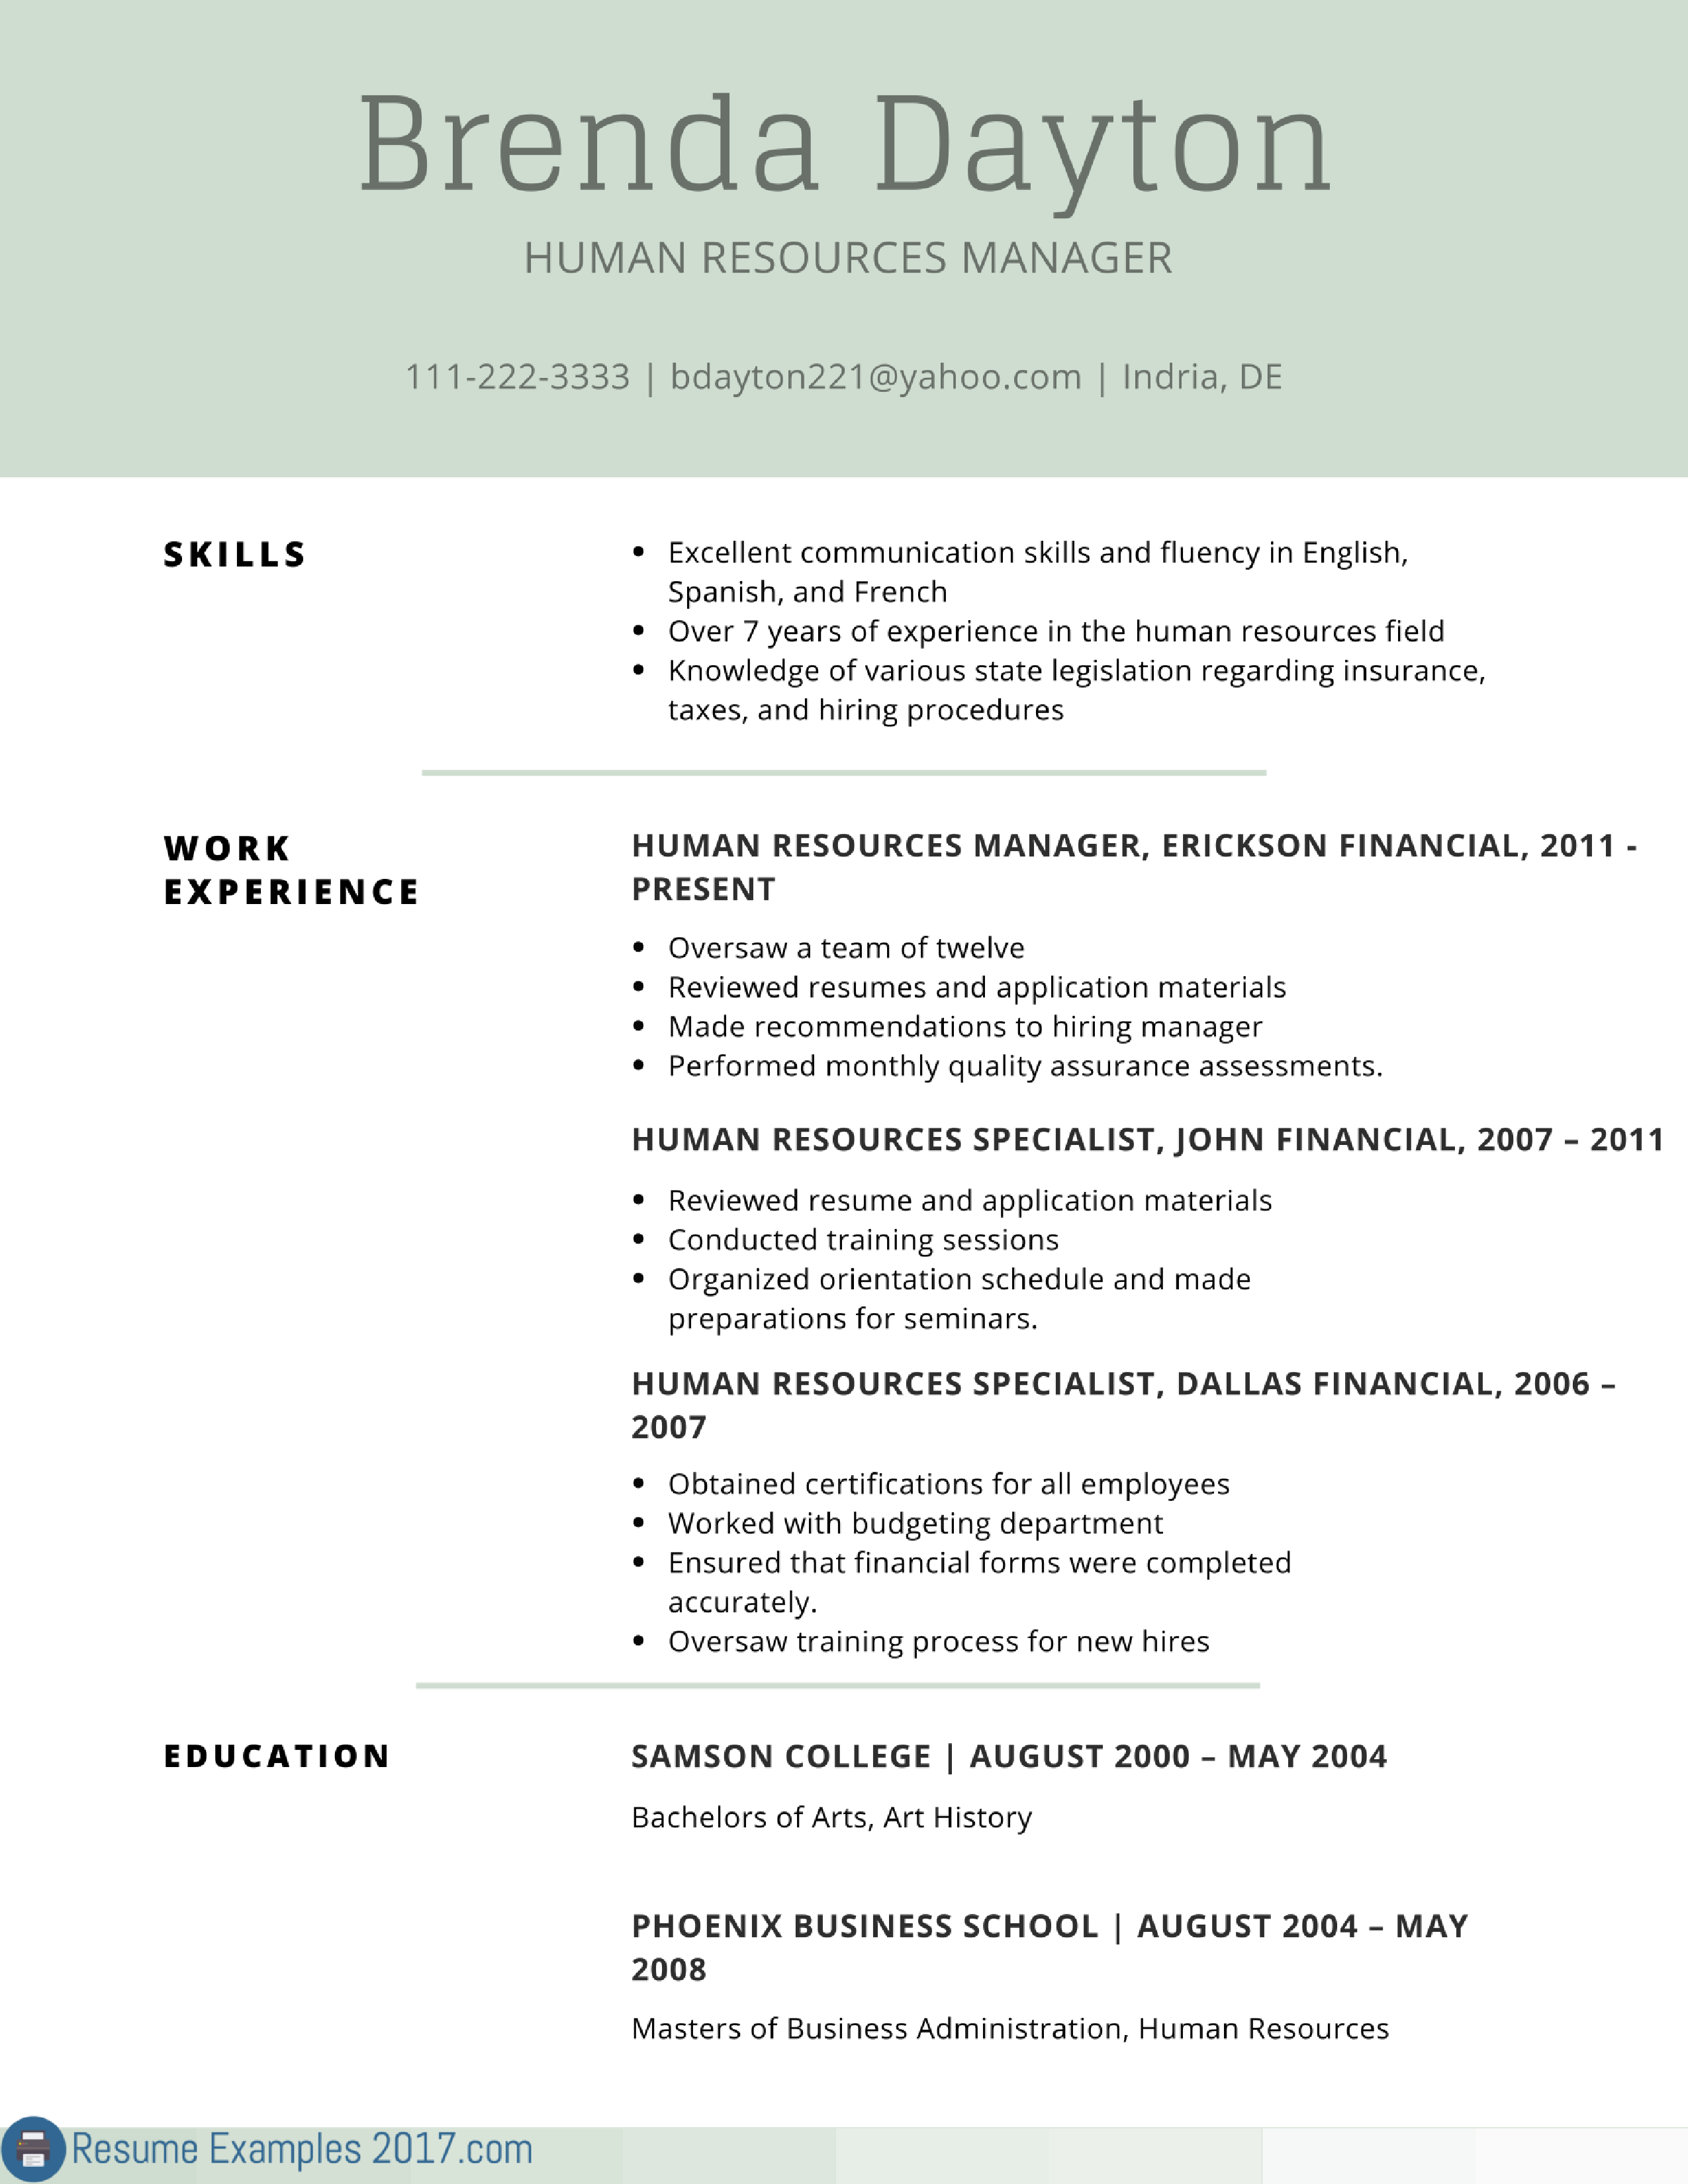 Resume Format 2017 Examples 